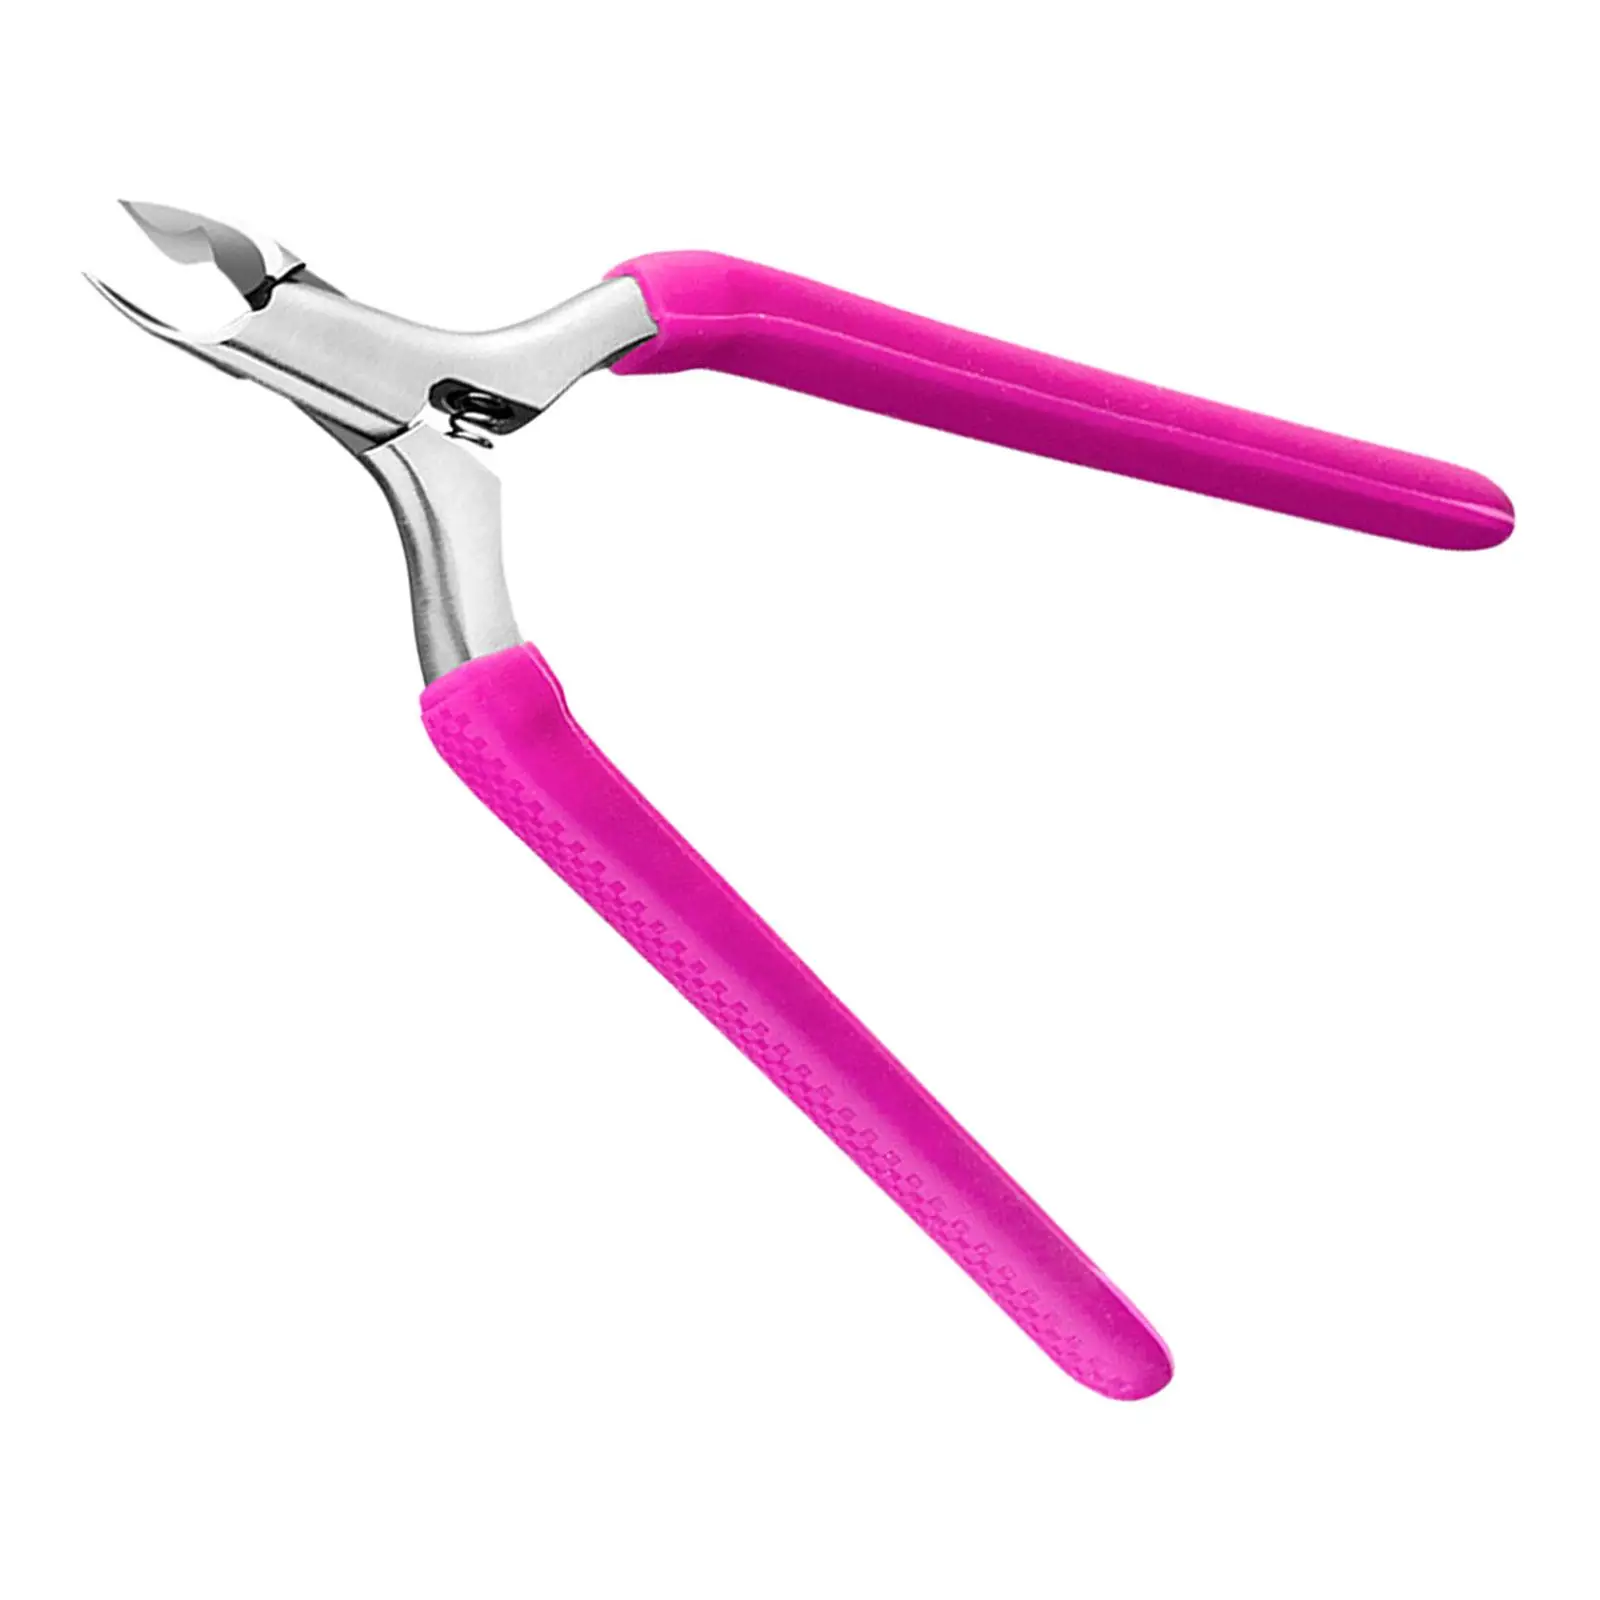 Cuticle Dry Stainless Steel Nail Care Tool Cuticle Cutter for SPA